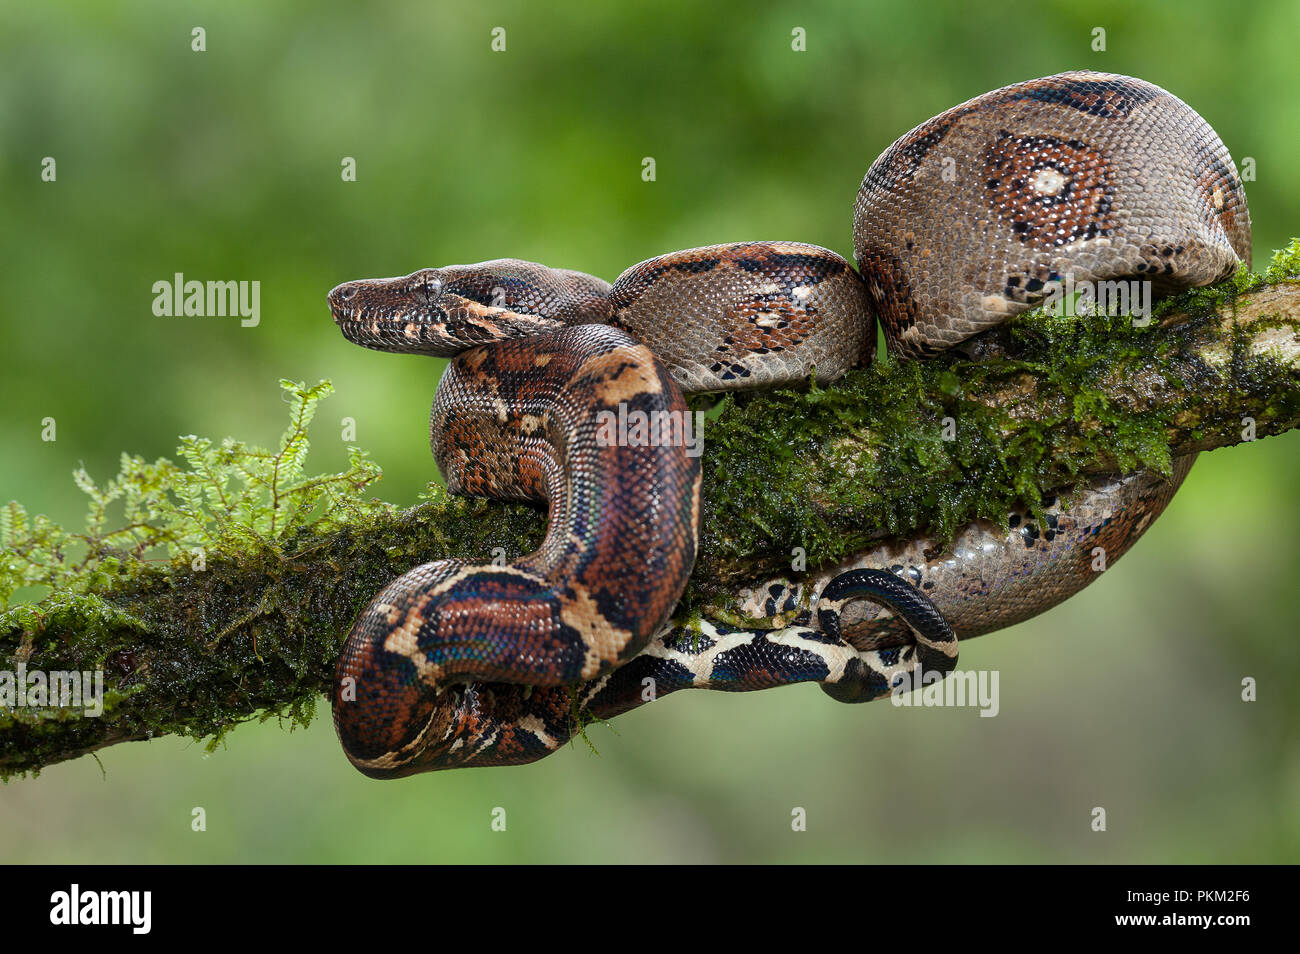 A boa constrictor snake photographed in Costa Rica Stock Photo